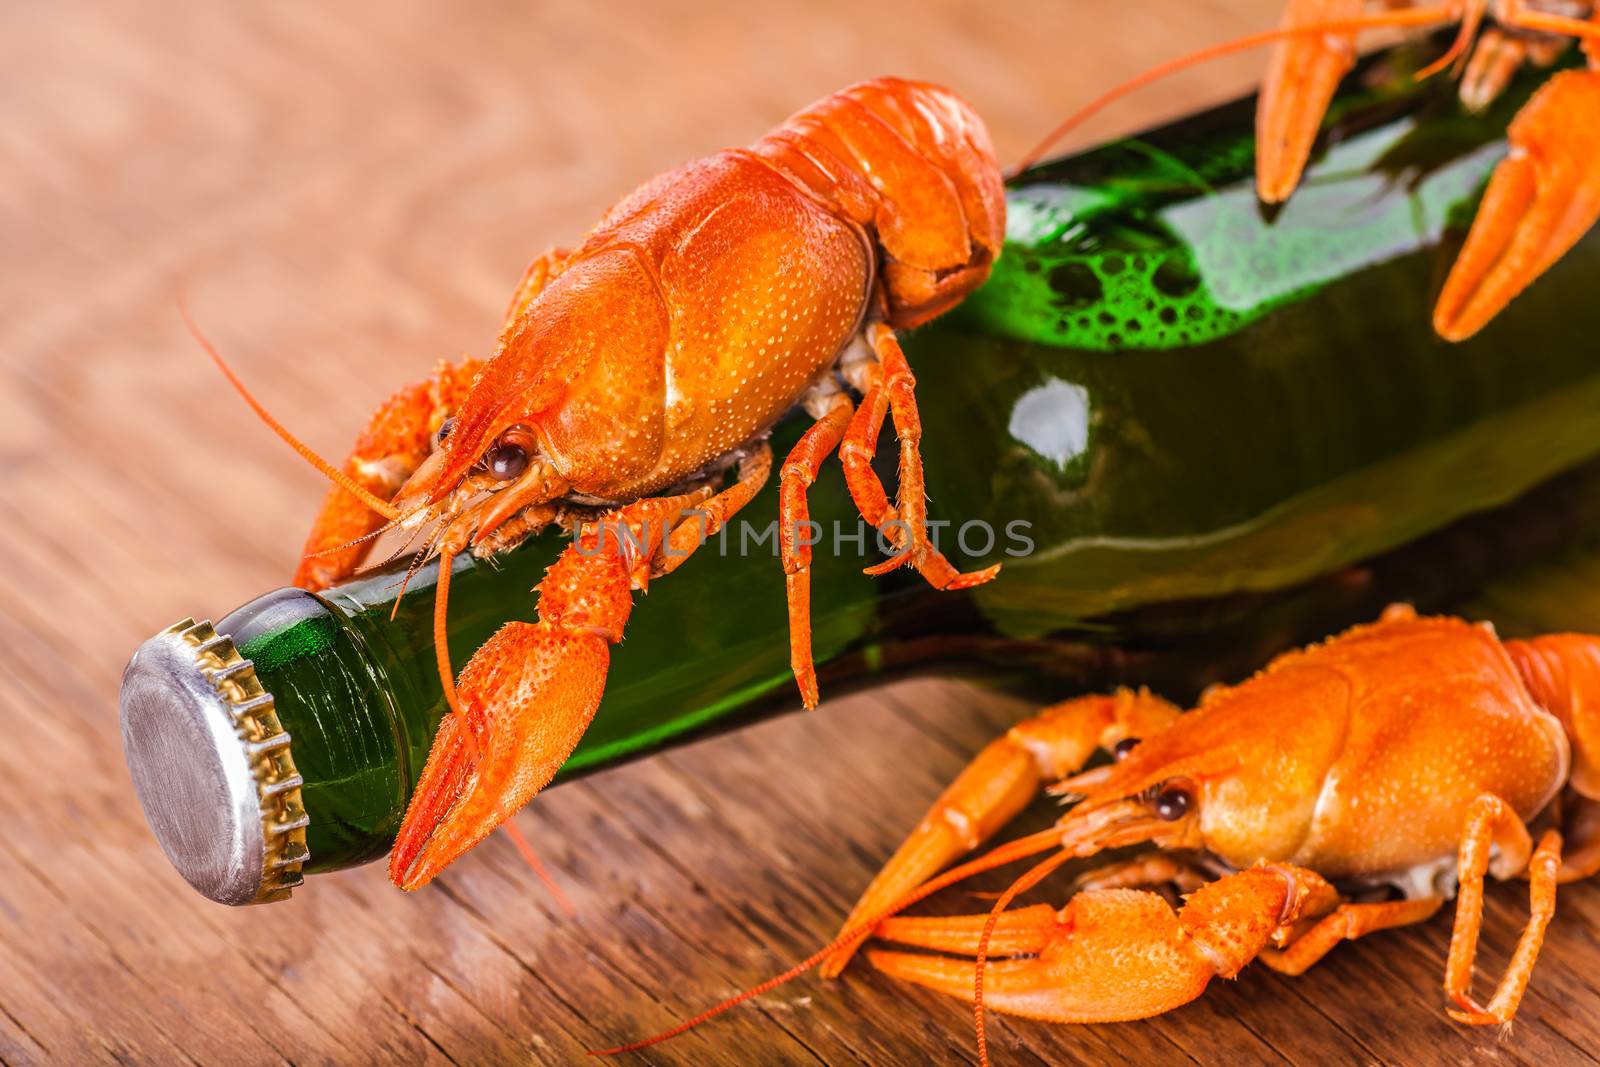 beer in a glass bottle and crayfish close-up on wooden background